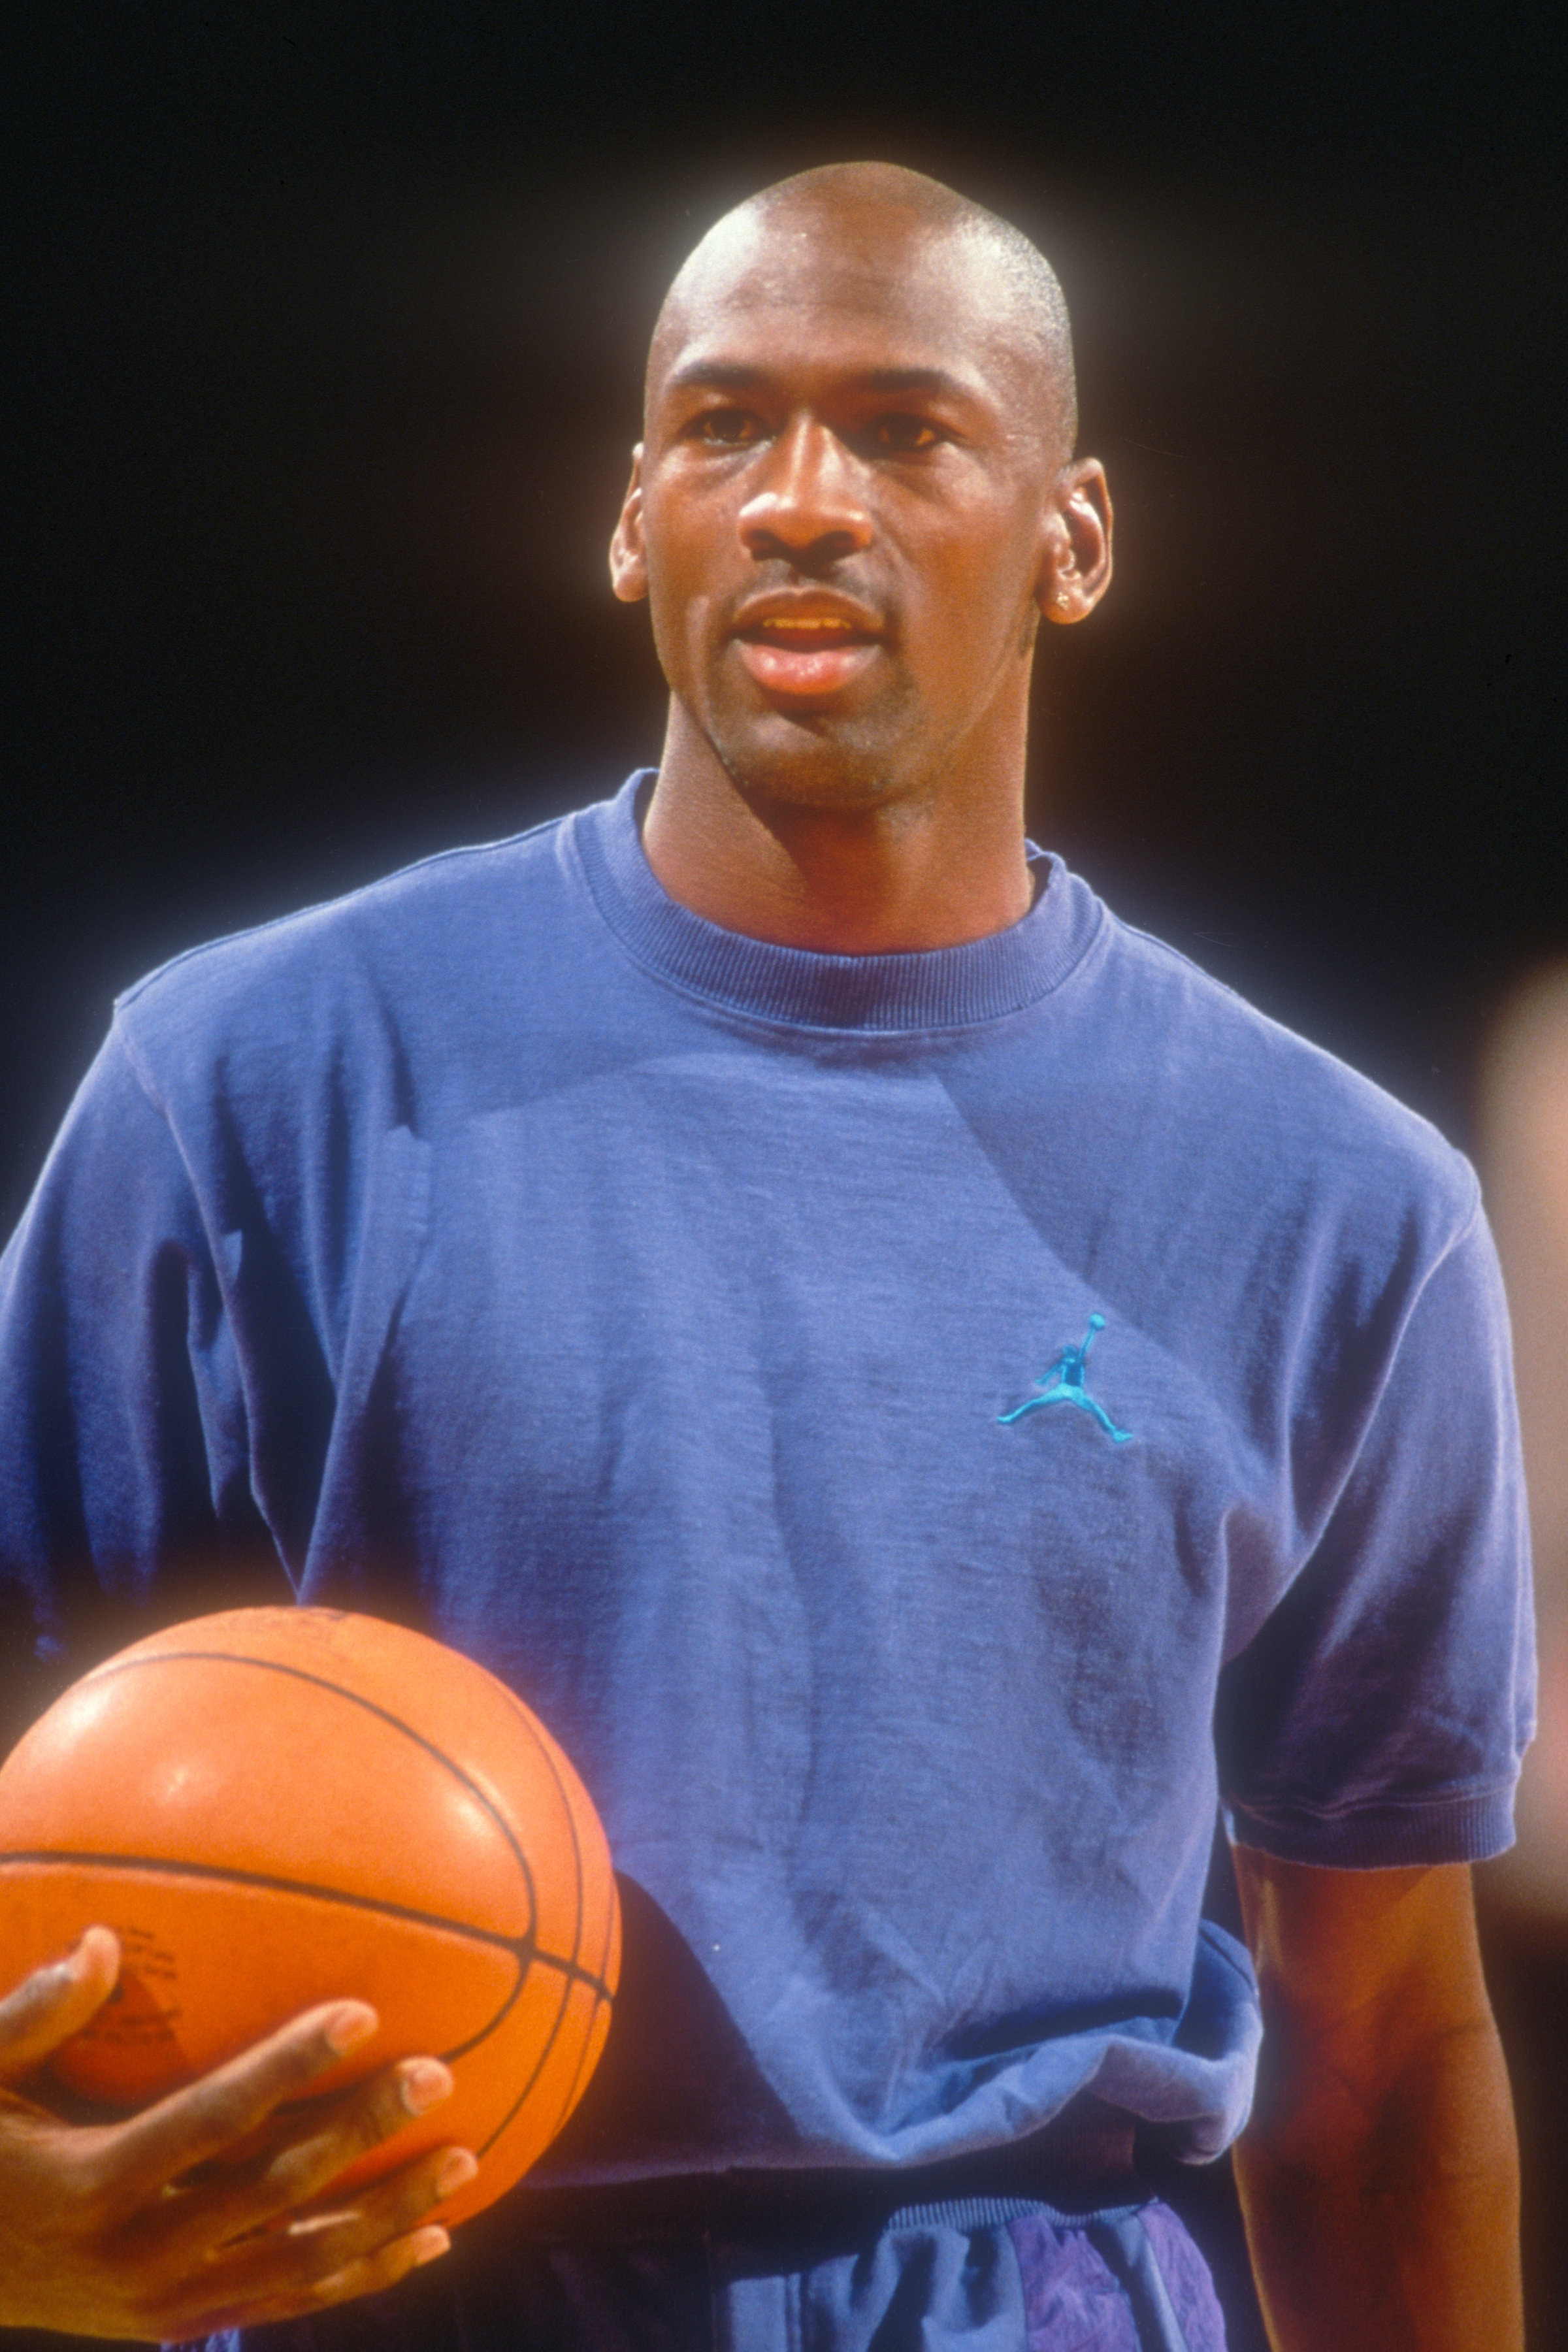 Michael Jordan before a basketball game at the Capital Centre on December 23, 1992 in Landover, Maryland | Source: Getty Images